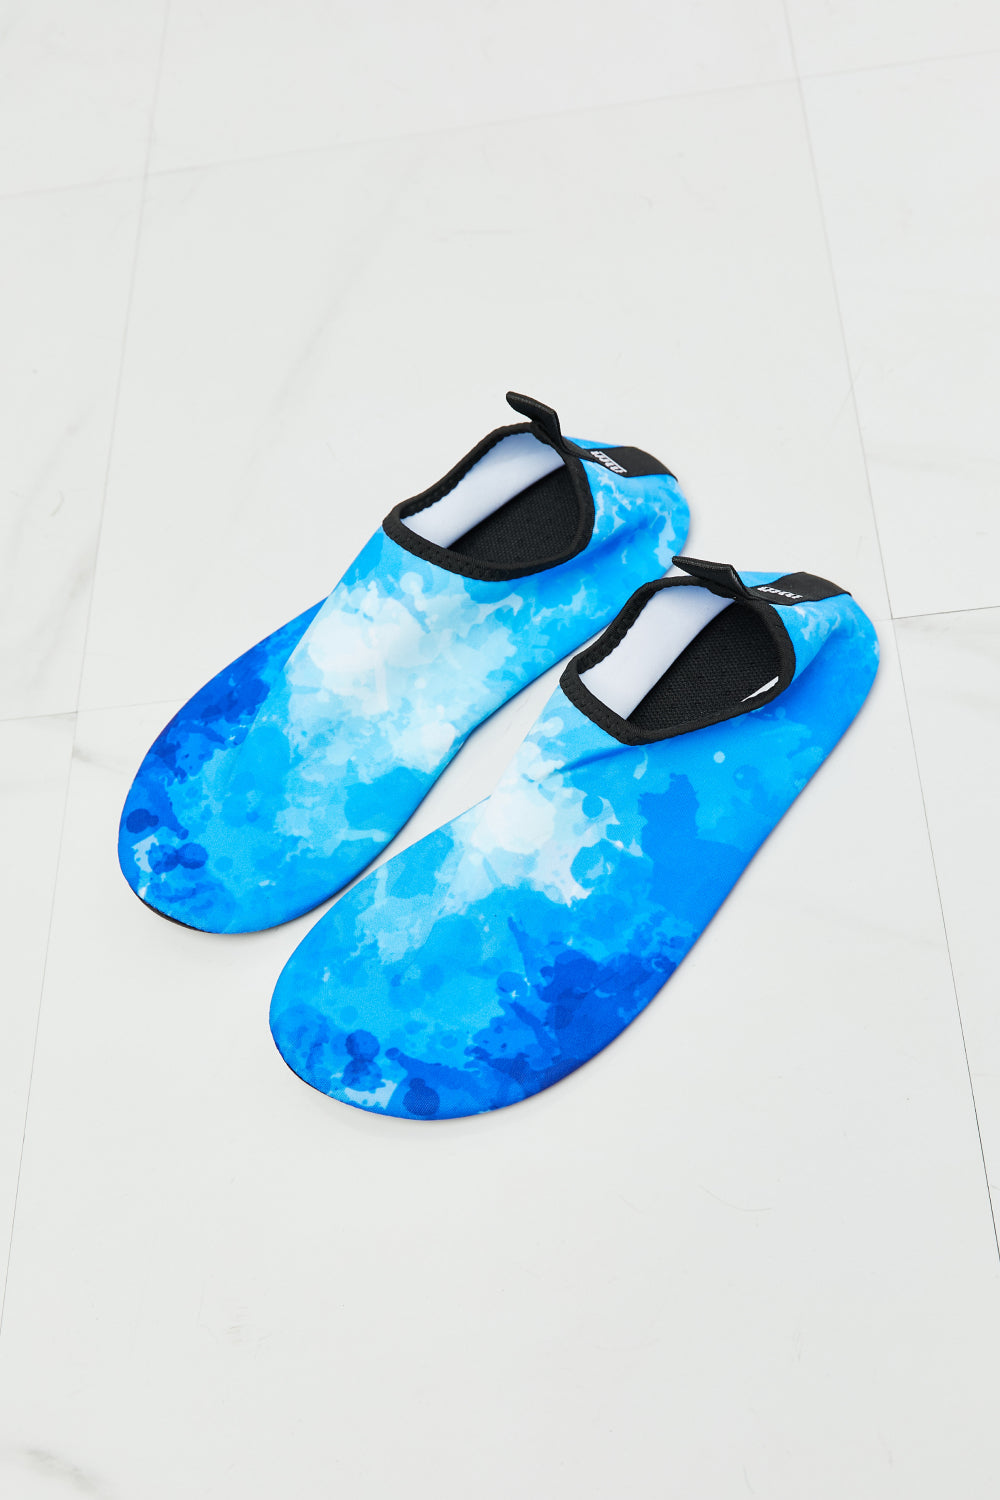 MMshoes On The Shore Water Shoes in Blue shoes, Bags & accessories